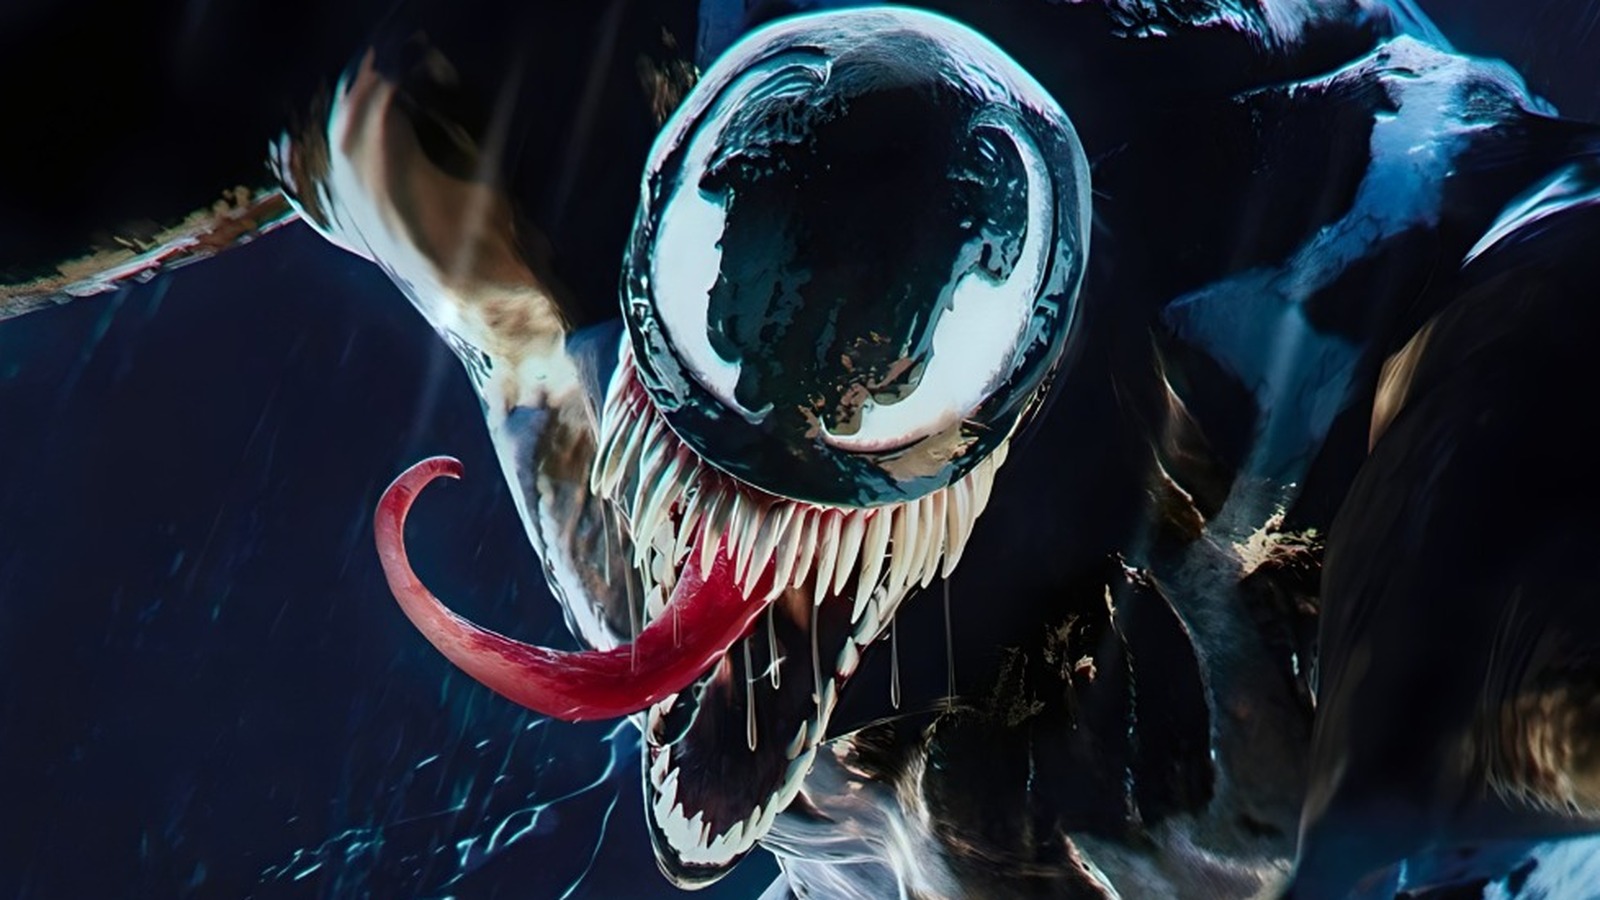 MARVEL'S SPIDER-MAN 2 Leak May Reveal An Unexpected New Venom